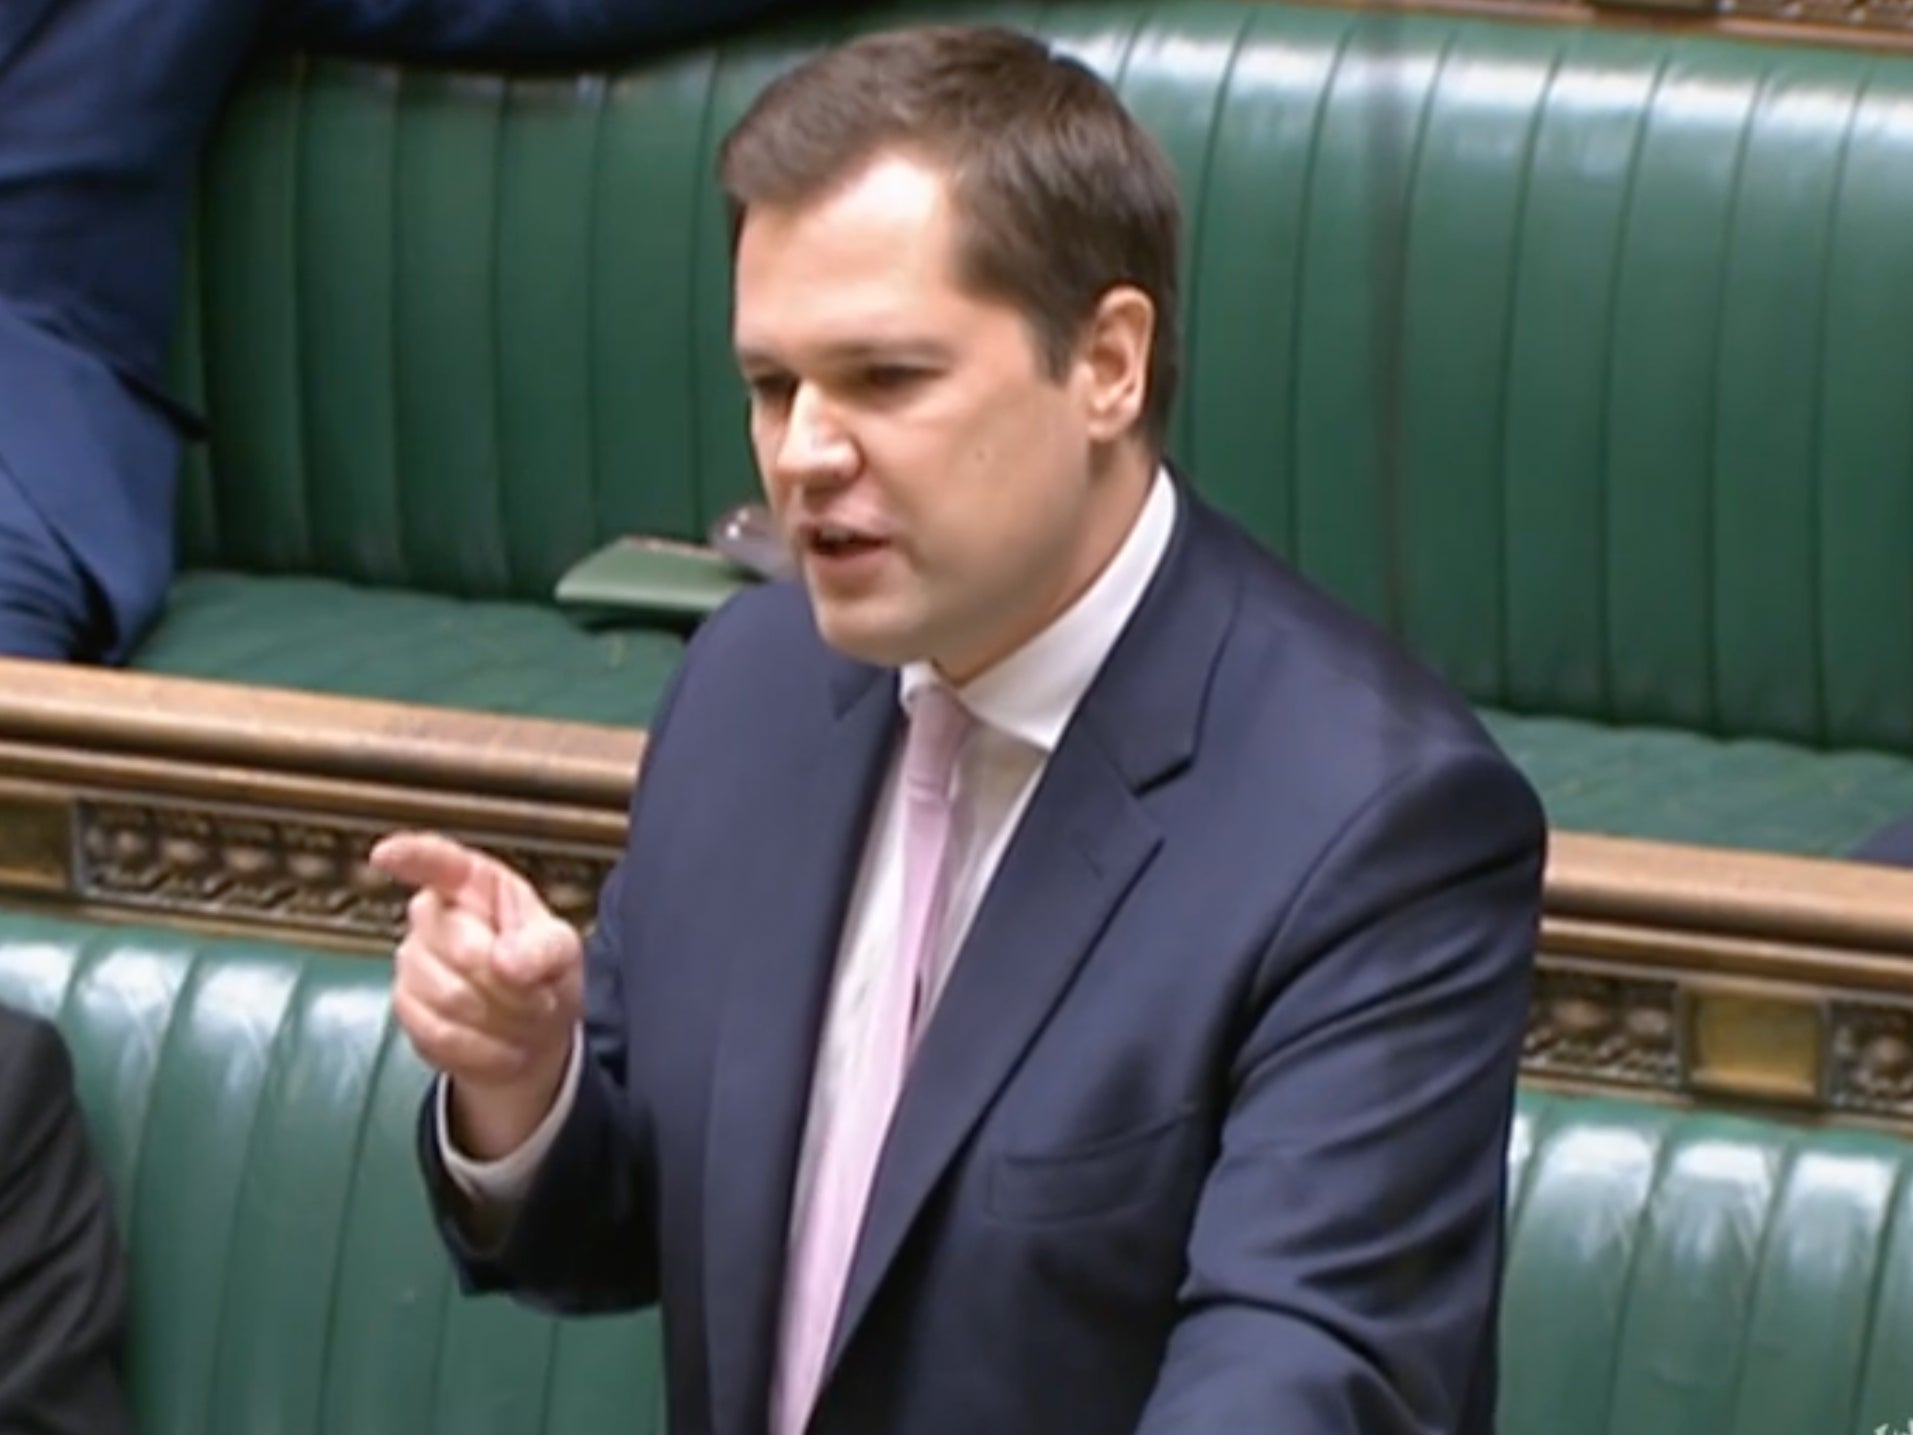 Immigration minister Robert Jenrick told MPs this week that 50 hotels will be closed by January